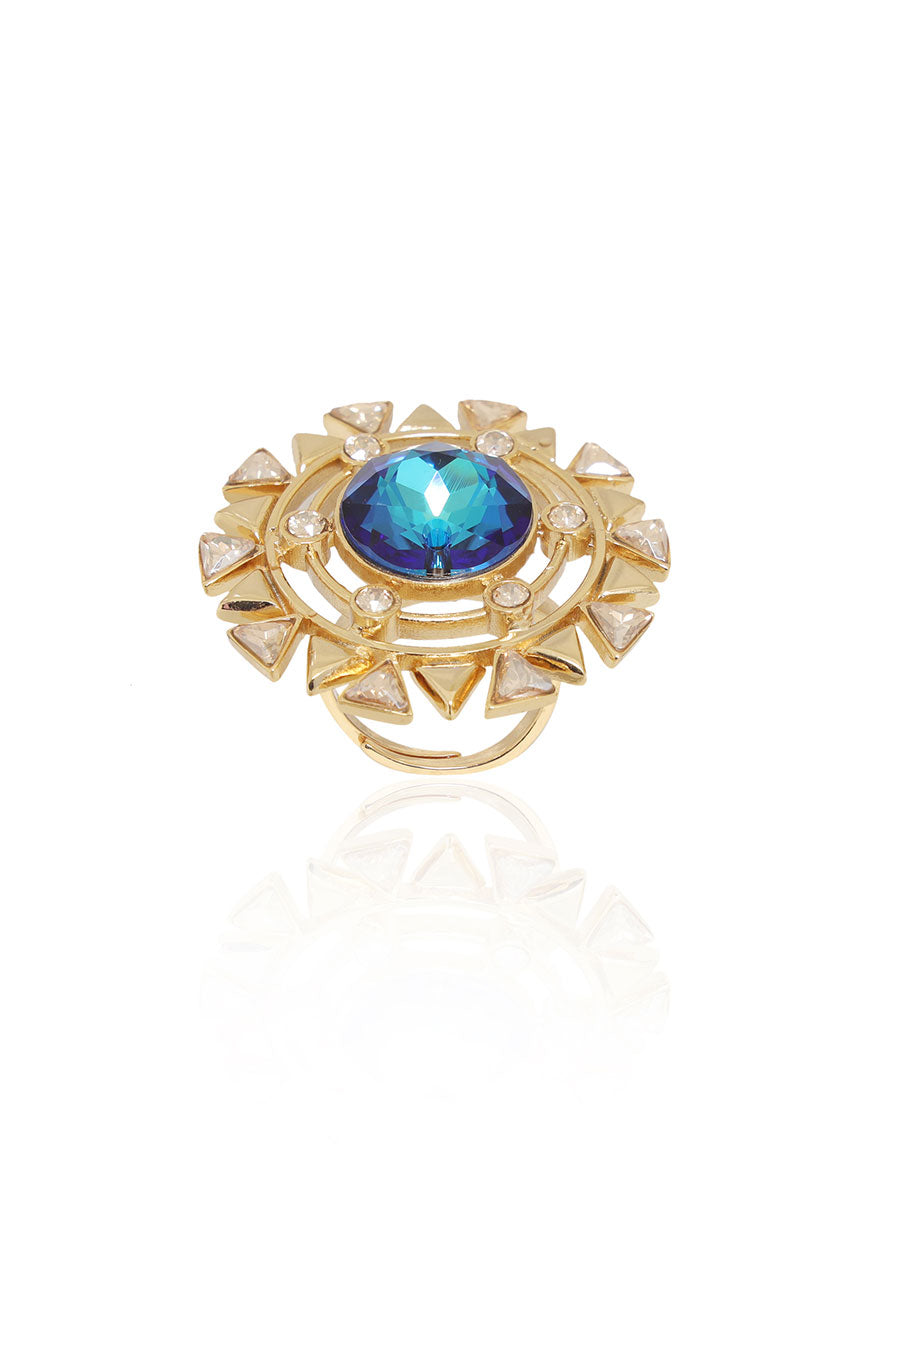 Blooming Daisy - Blue Swarovski Cocktail Ring